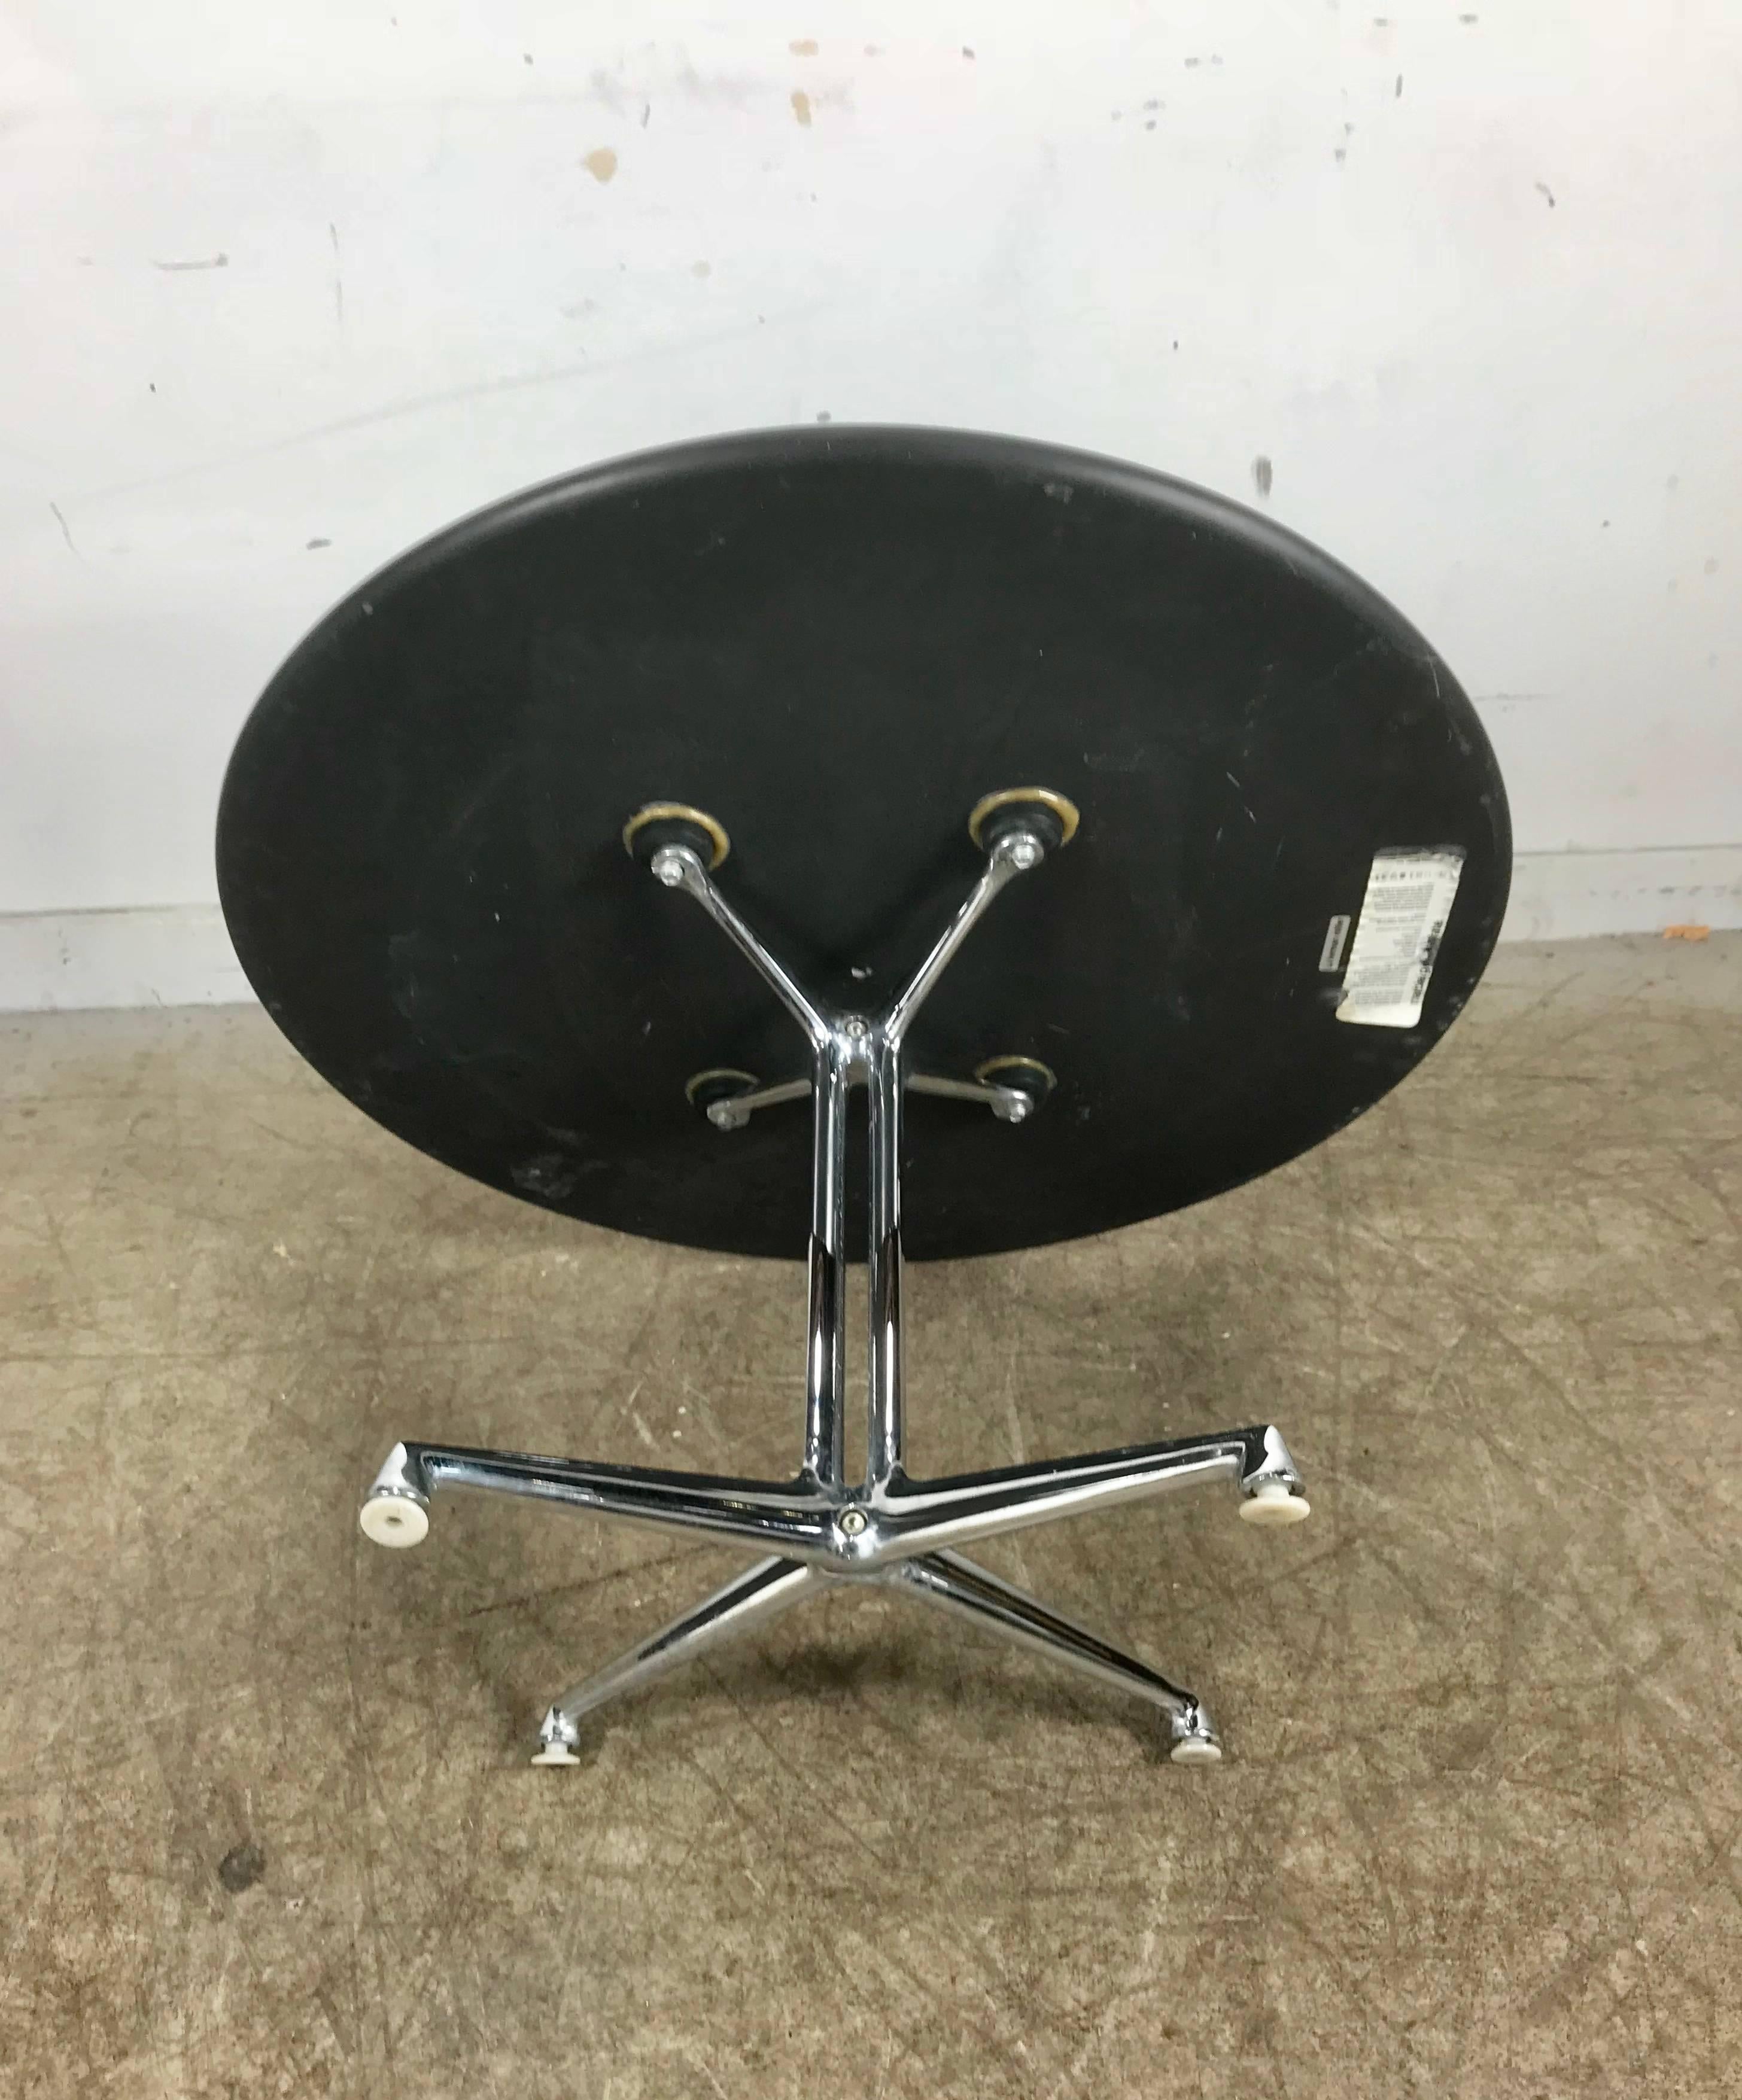 Charles and Ray Eames La Fonda table with slate top made by Herman Miller. Retains original Herman Miller label as well as marble and granite care instructions.